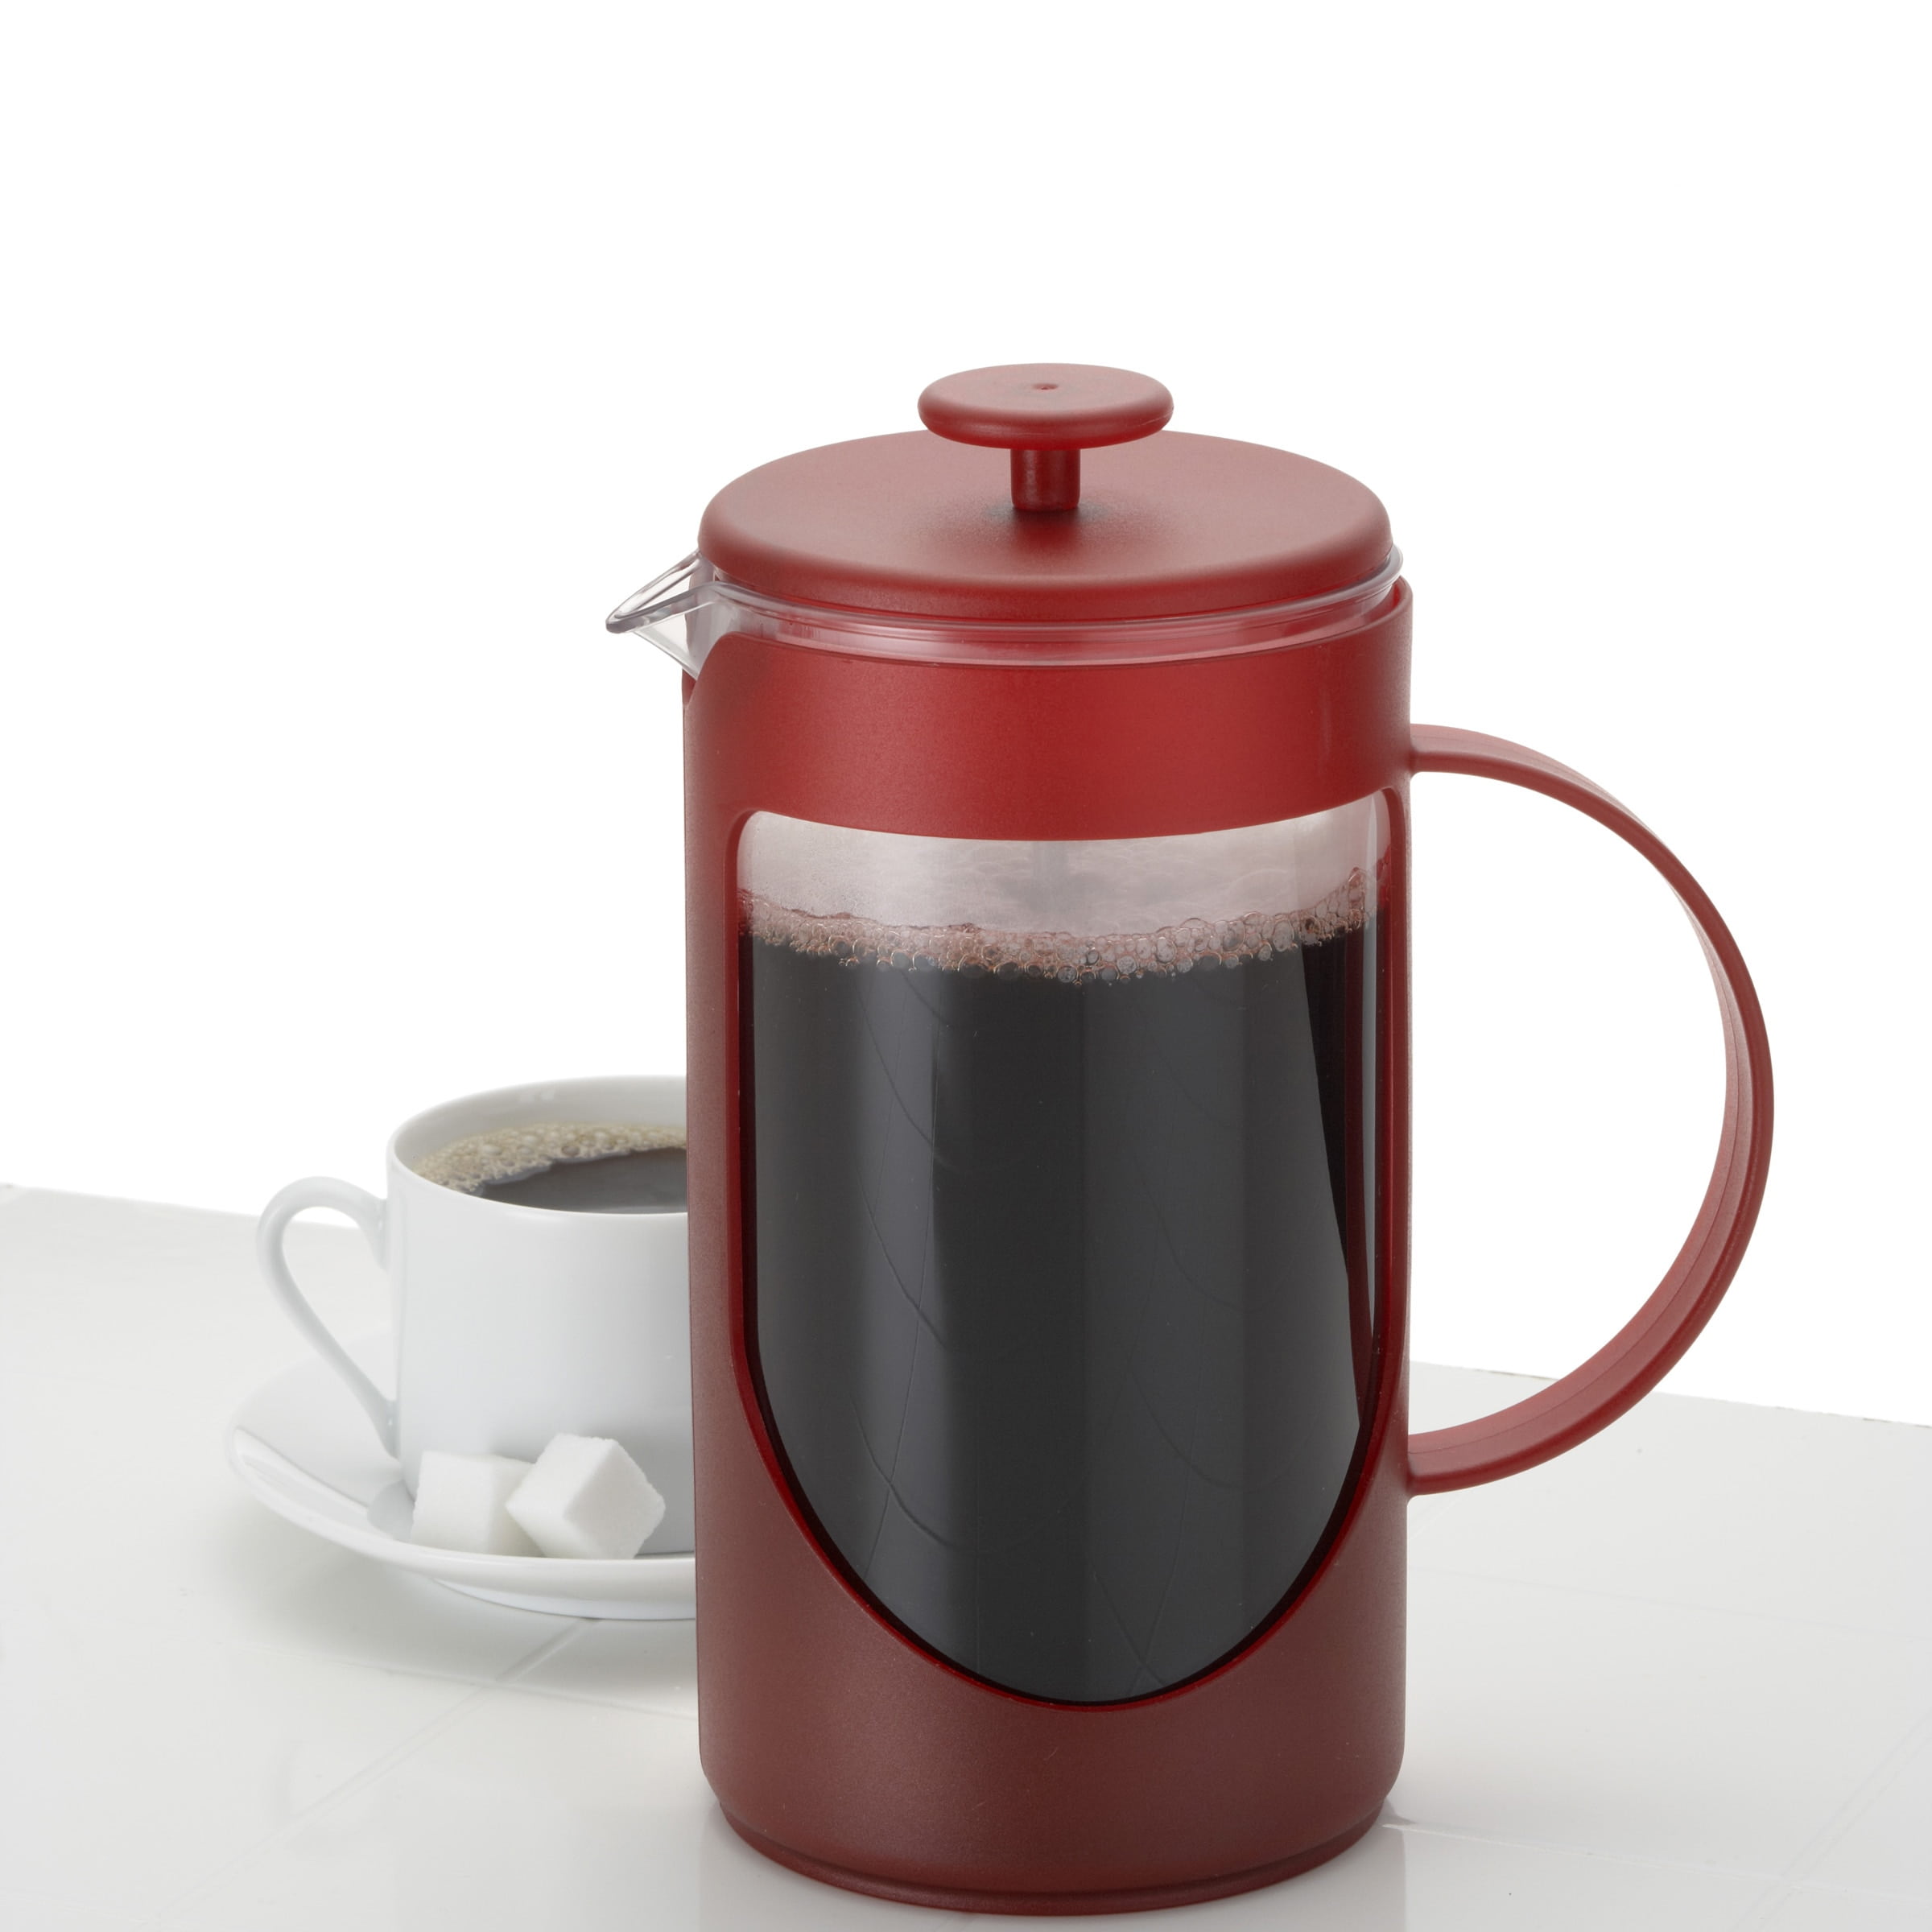 BonJour® French Press with Flavor Lock® Filter System and Filtering Lid 